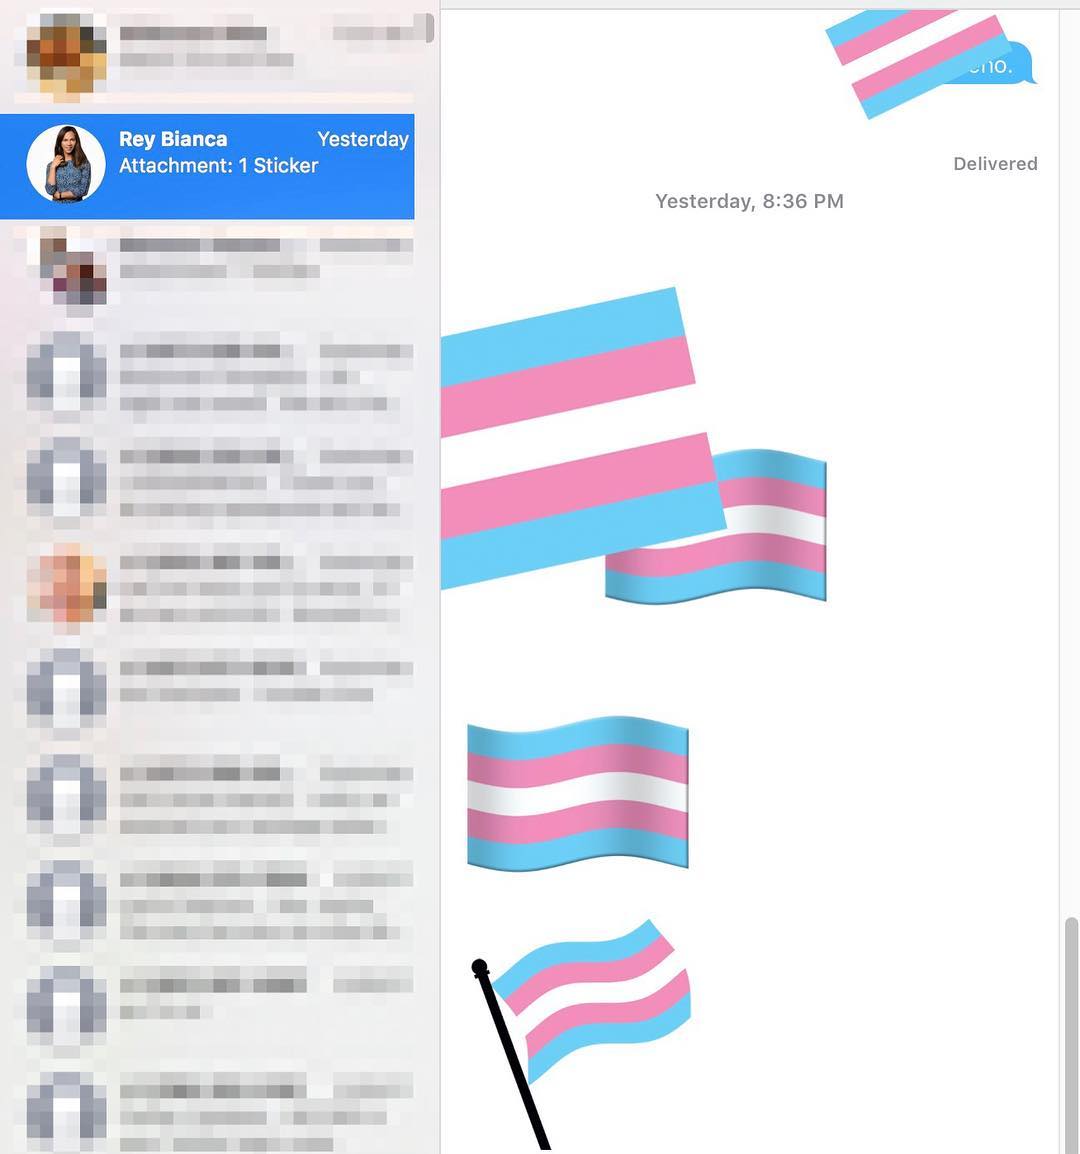 iMessage full of pride, smiles ear to ear when I see great people who are visible and amazing. . App submitted to iTunes waiting for approval âœŒï¸ #TransVisibility #transpride #transrespect capitaltranspride As Washington, DC goes, so goes the nation